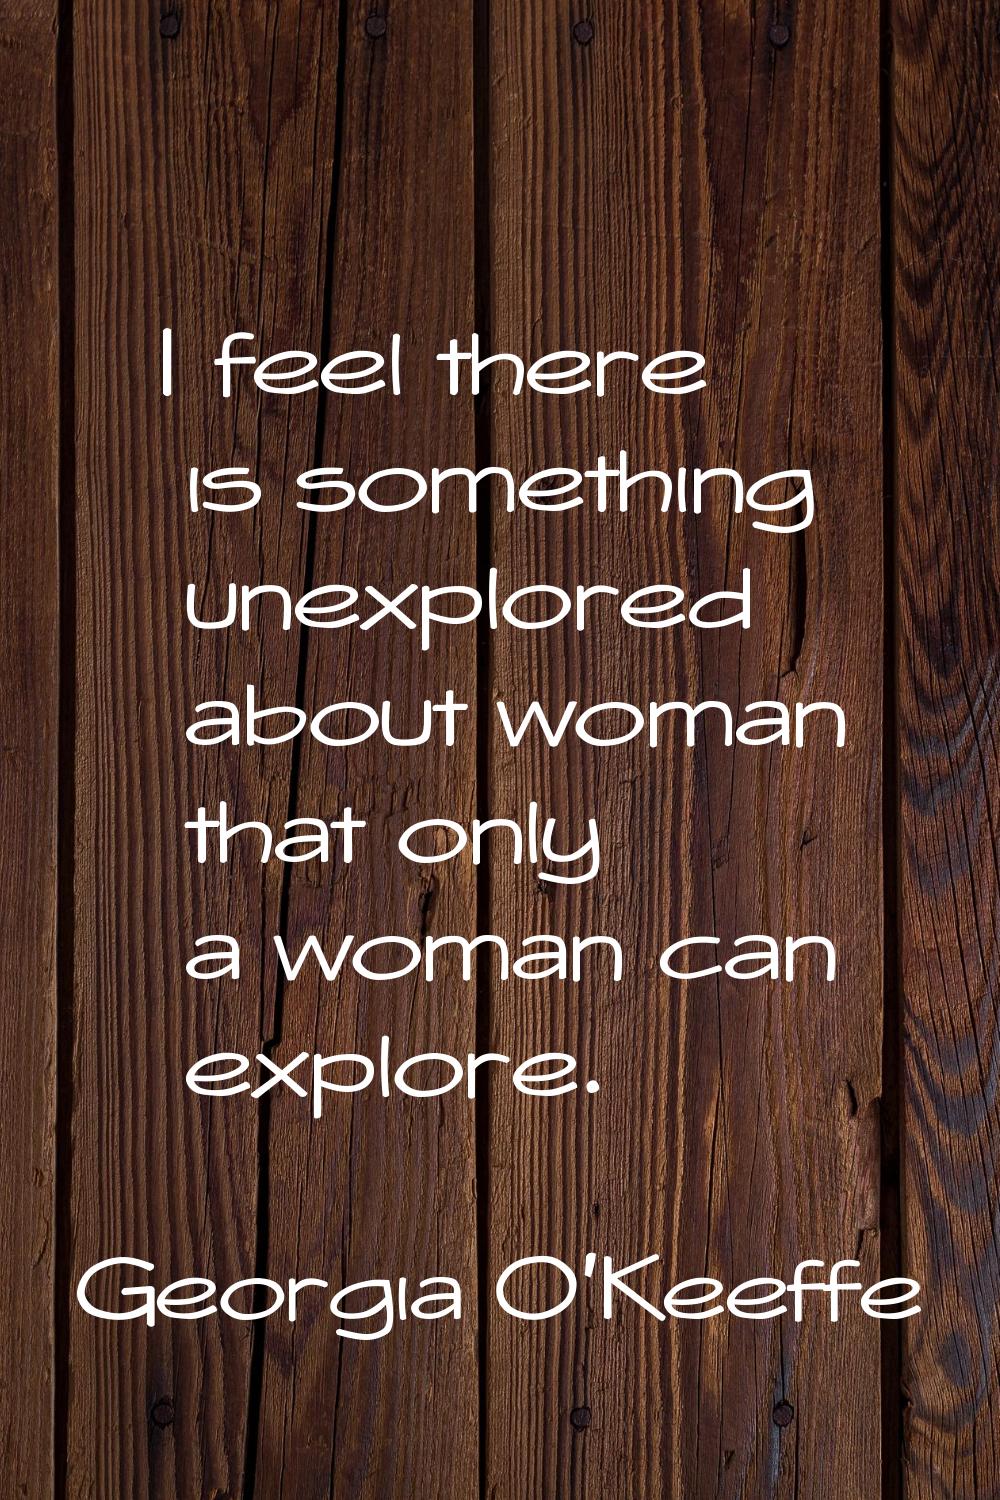 I feel there is something unexplored about woman that only a woman can explore.